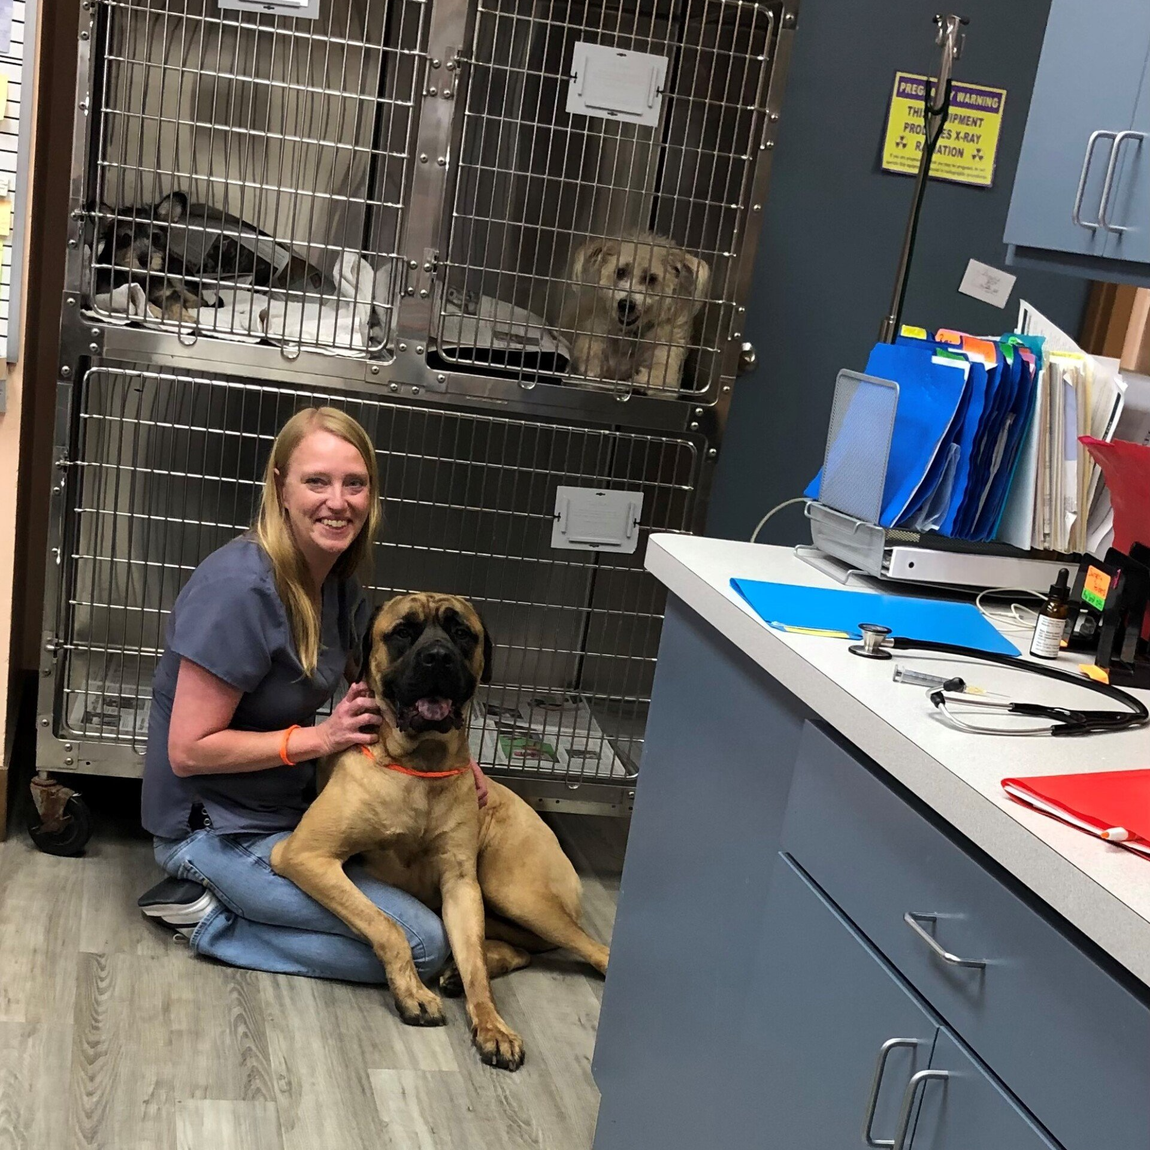 Black cat and brown dog - Mesquite, TX - Rodeo Drive Veterinary Hospital